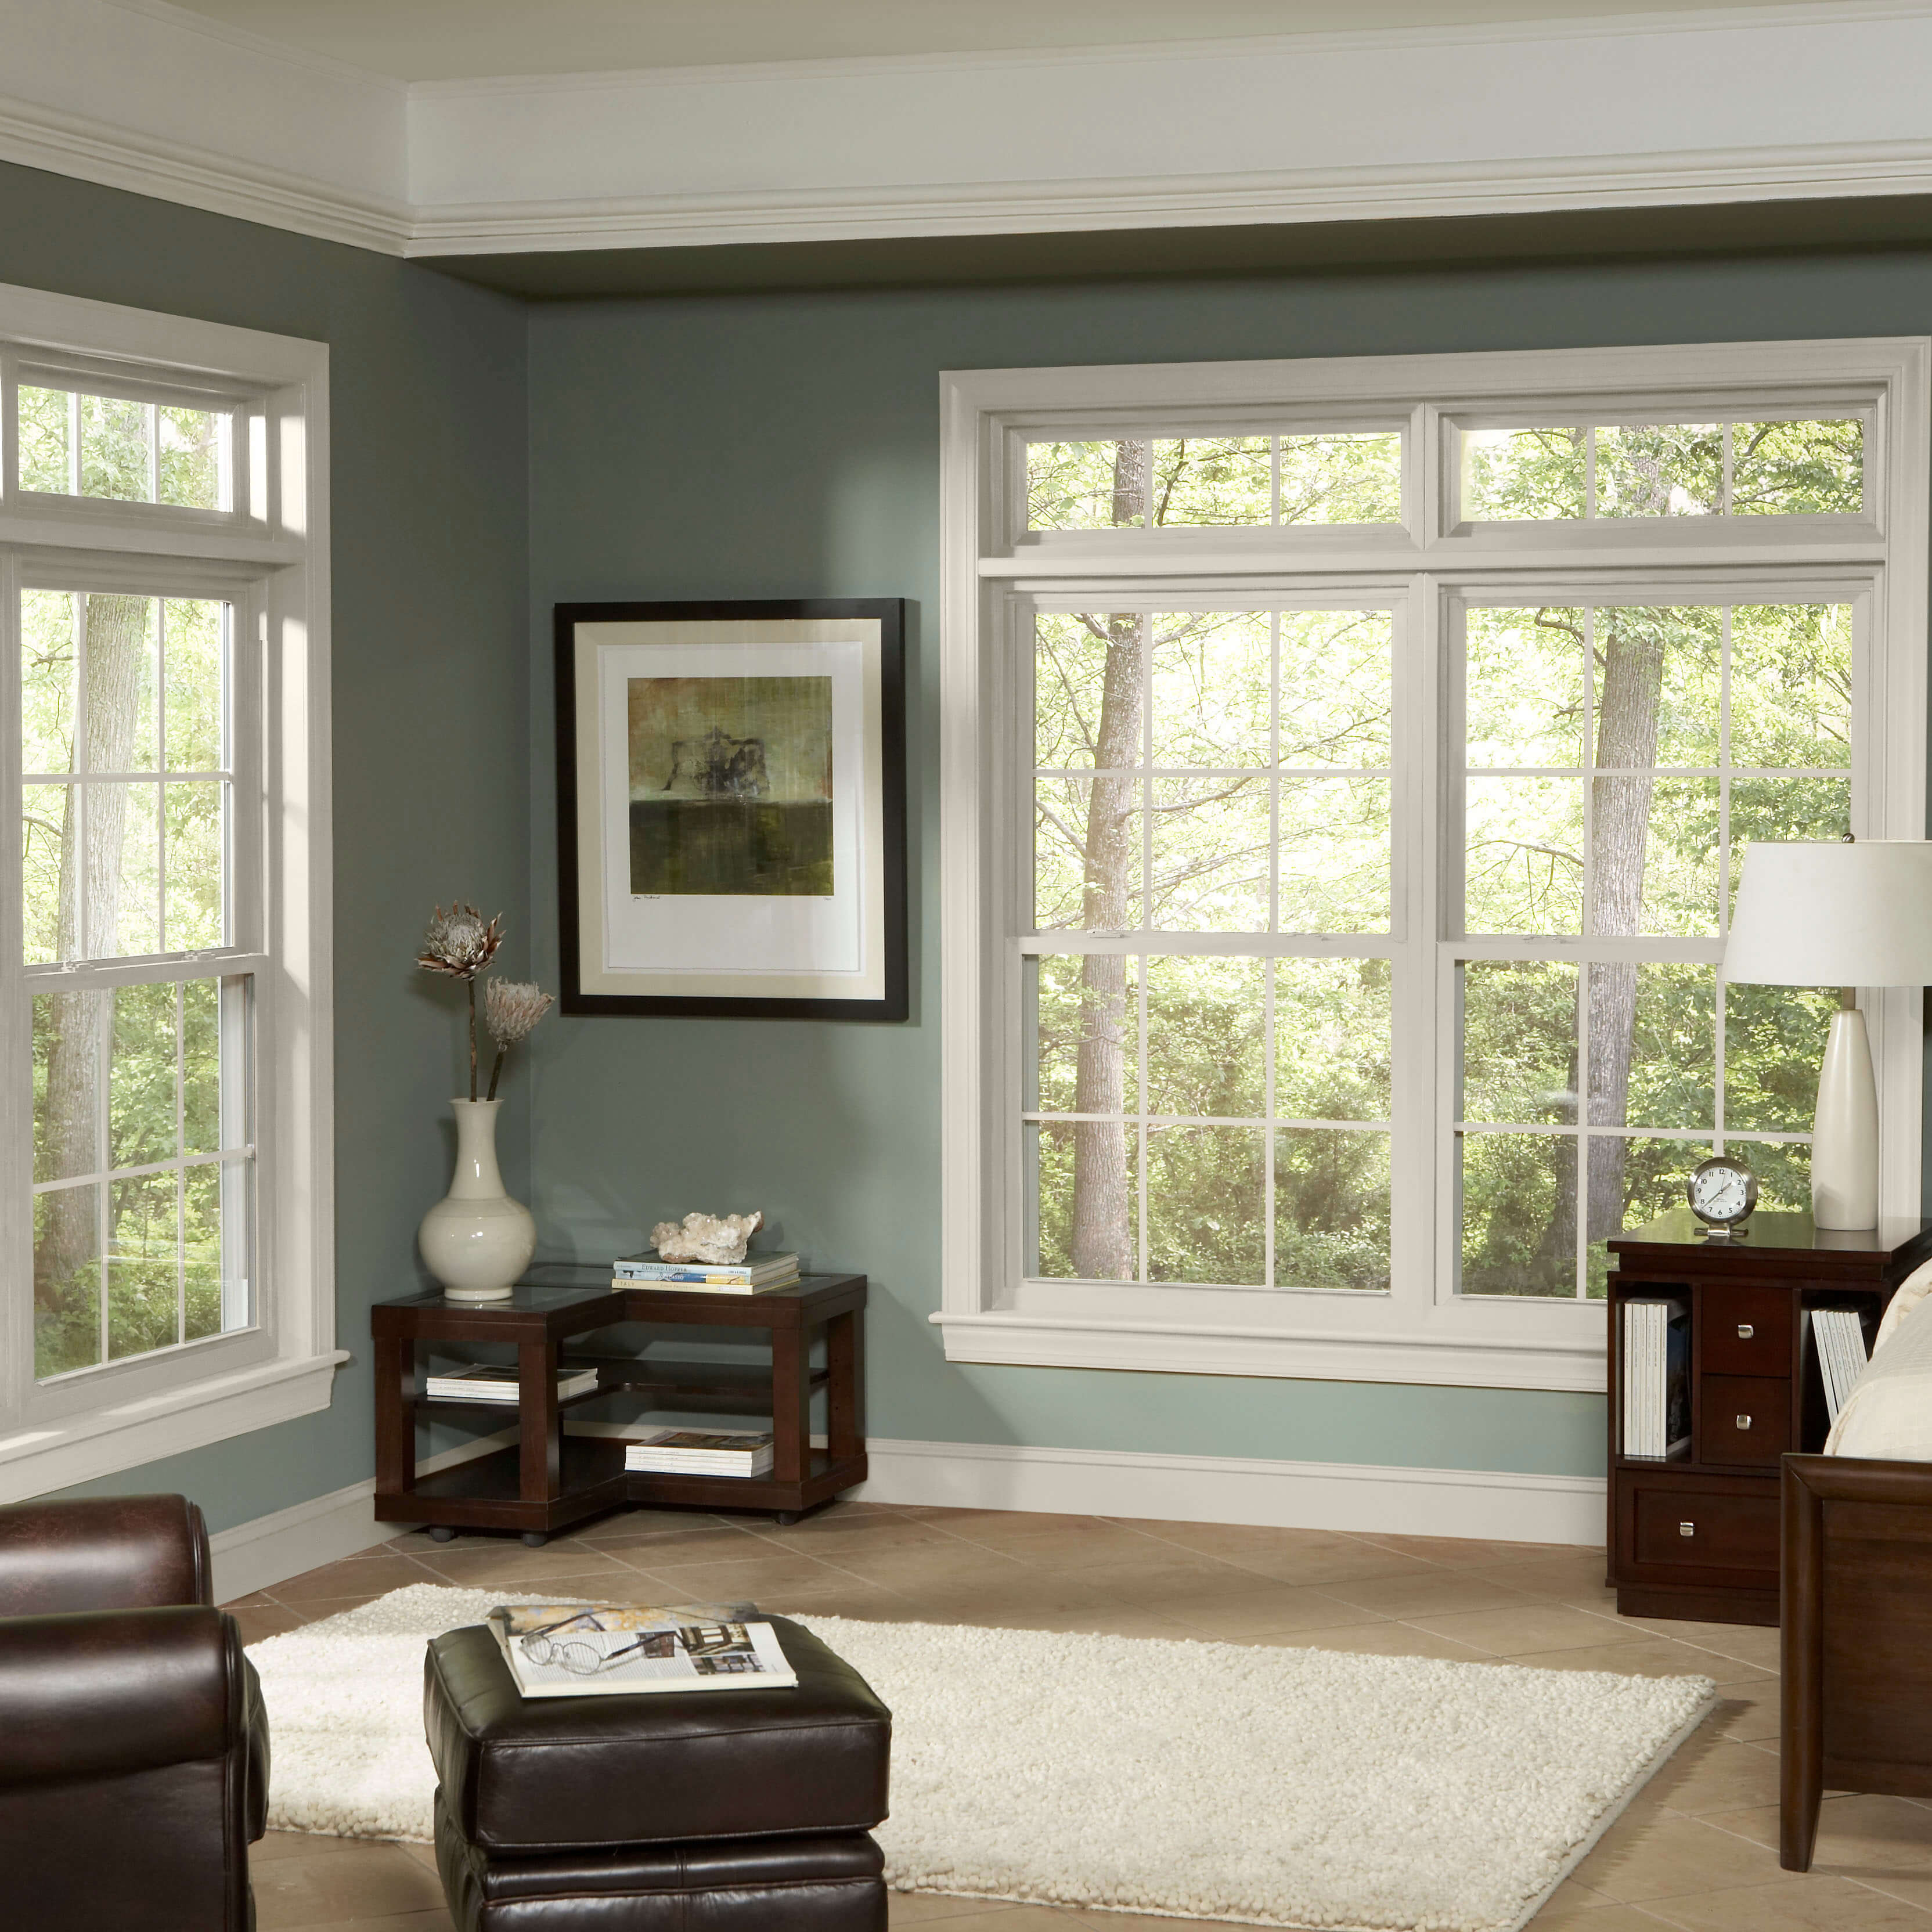 Series 1000 Double Hung Replacement Windows Model: Series 6000 in New Hampshire Starting At $609